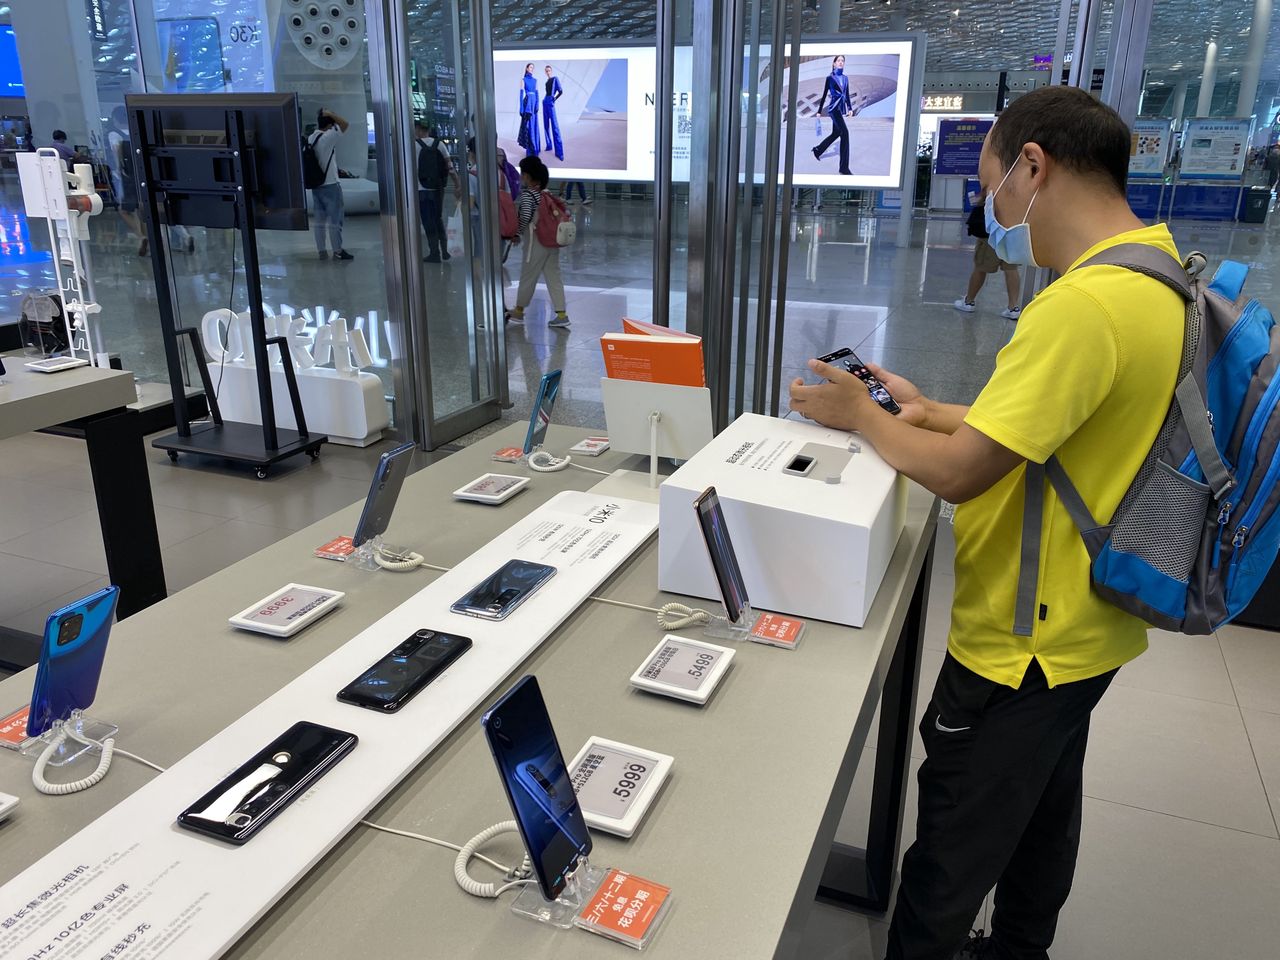 SHENZHEN - AUGUST 14: A man looks at Xiaomi smartphones at a Xiaomi experience store on August 14, 2020 in Shenzhen, Guangdong Province of China. (Photo by VCG/VCG via Getty Images)